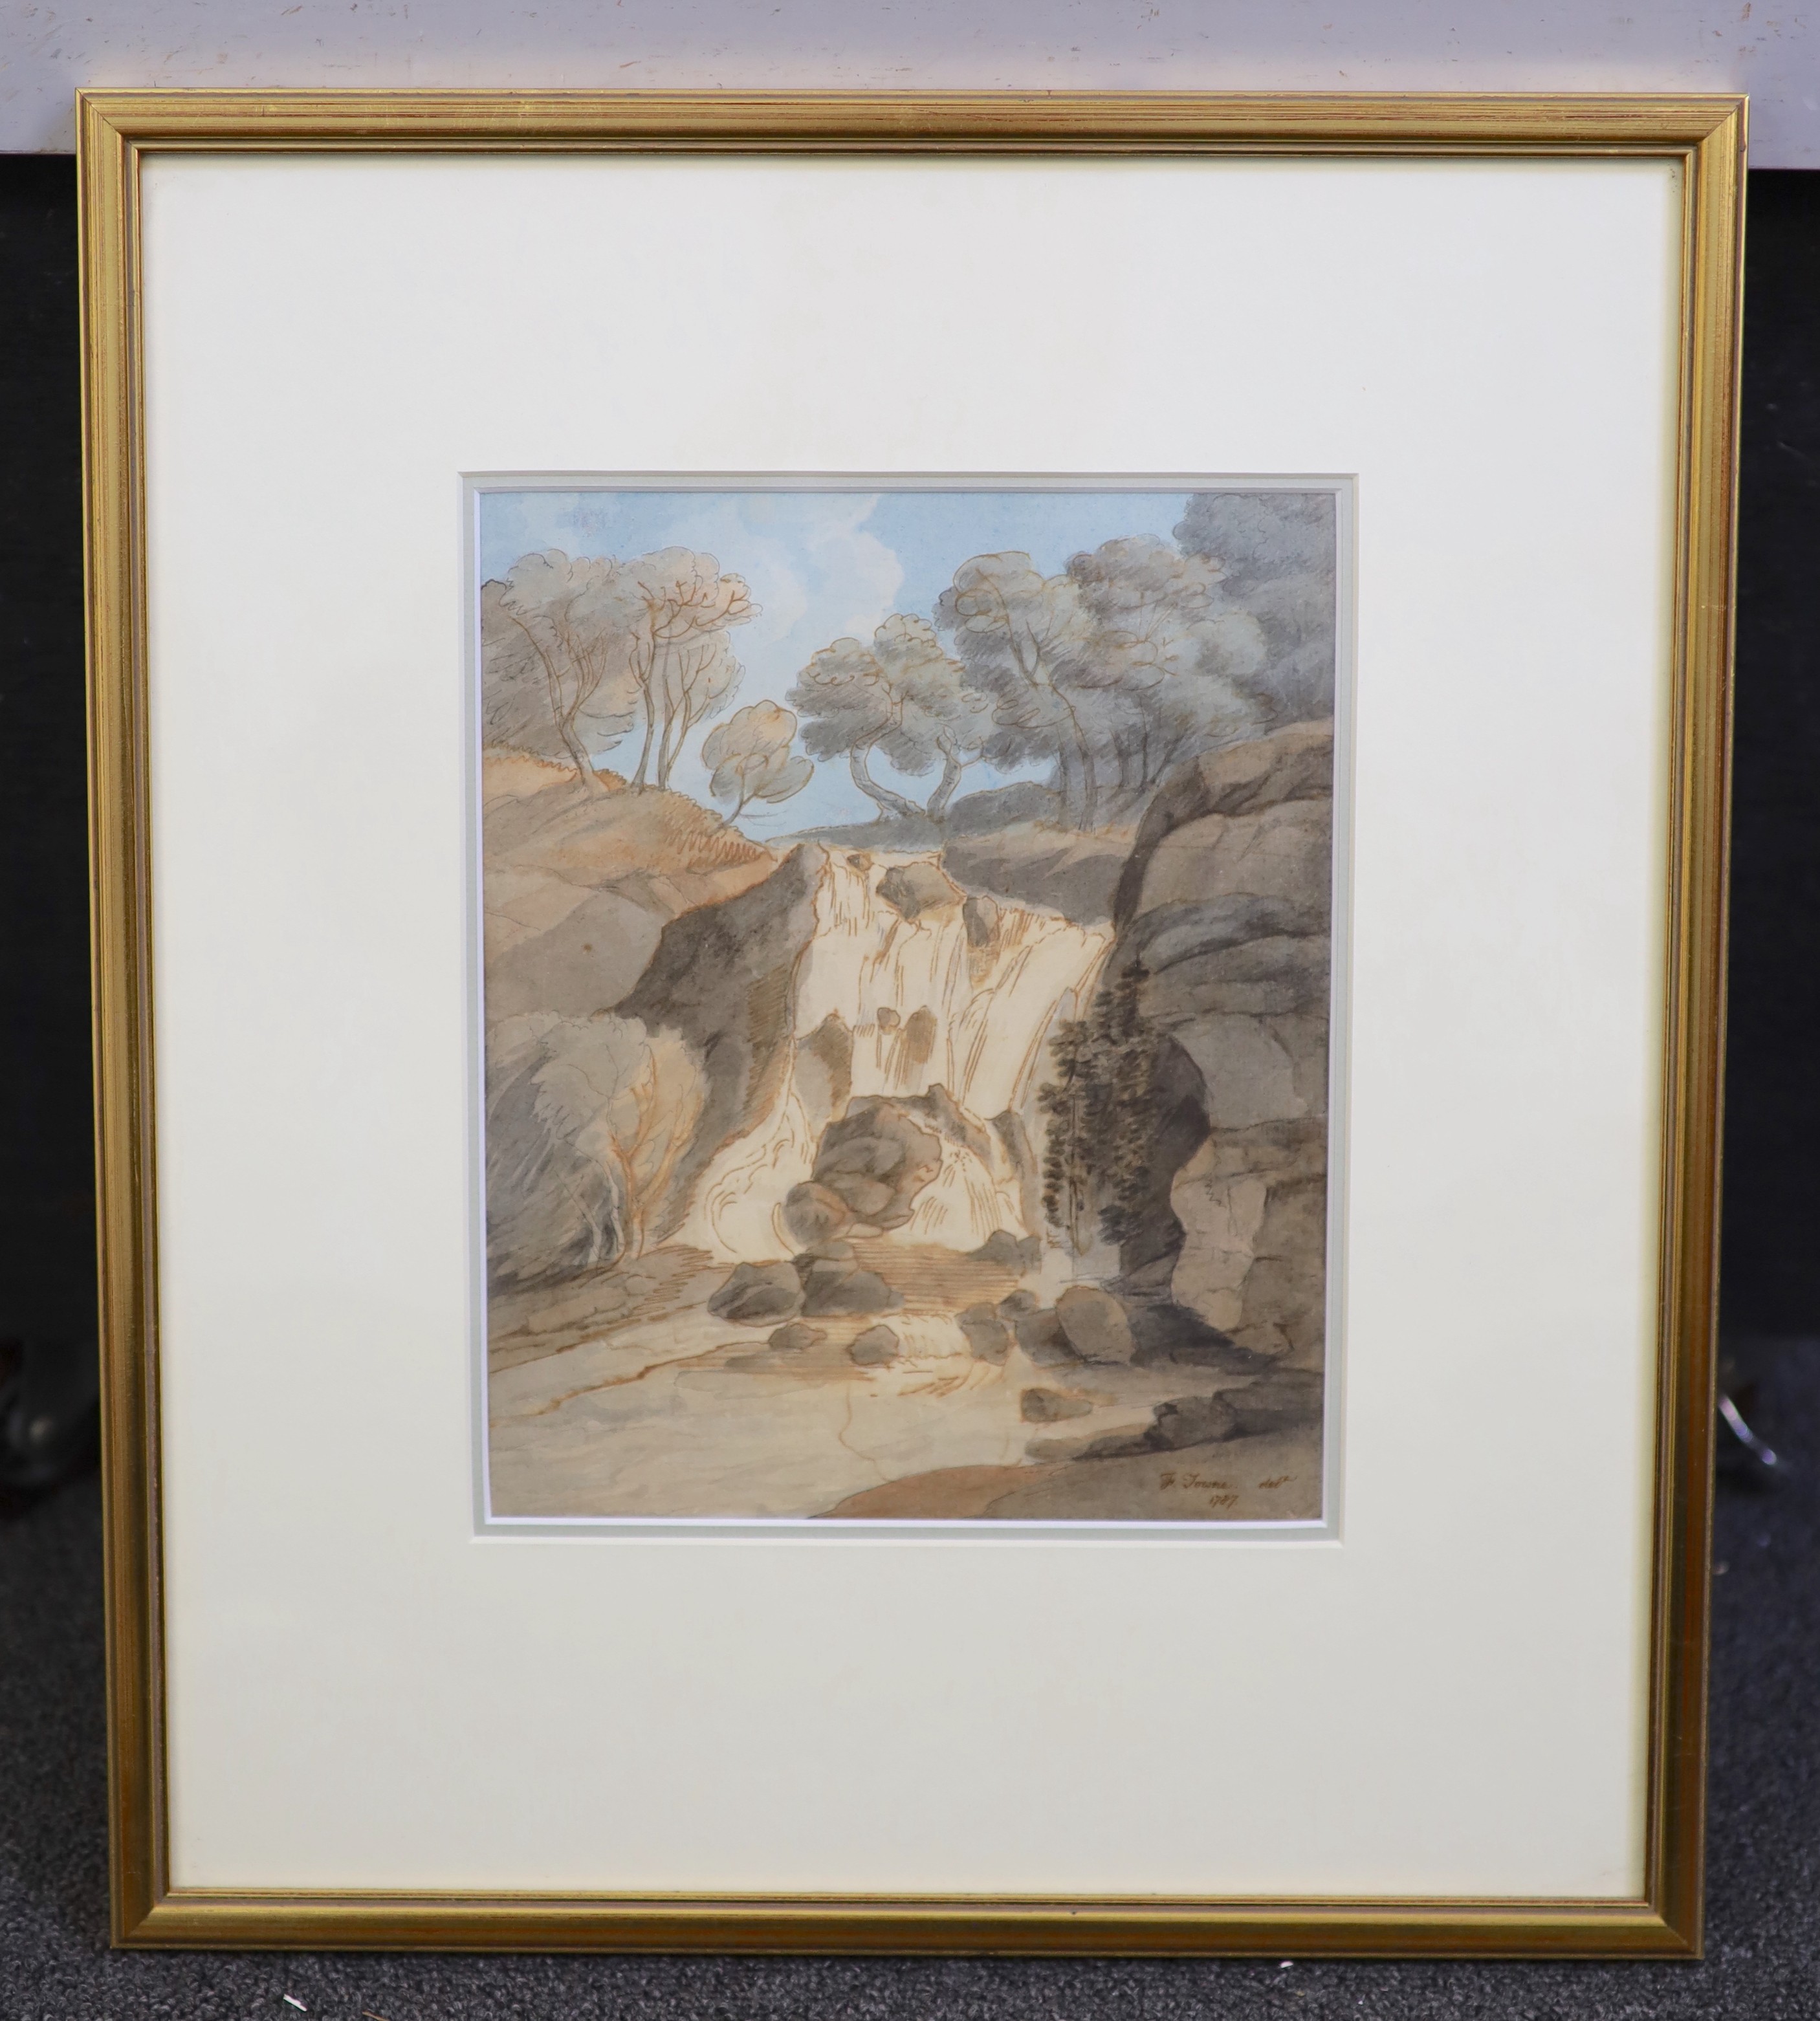 Francis Towne (British, 1740-1816), 'Waterfall at Chudley Rock', watercolour and ink, 22.5 x 18cm